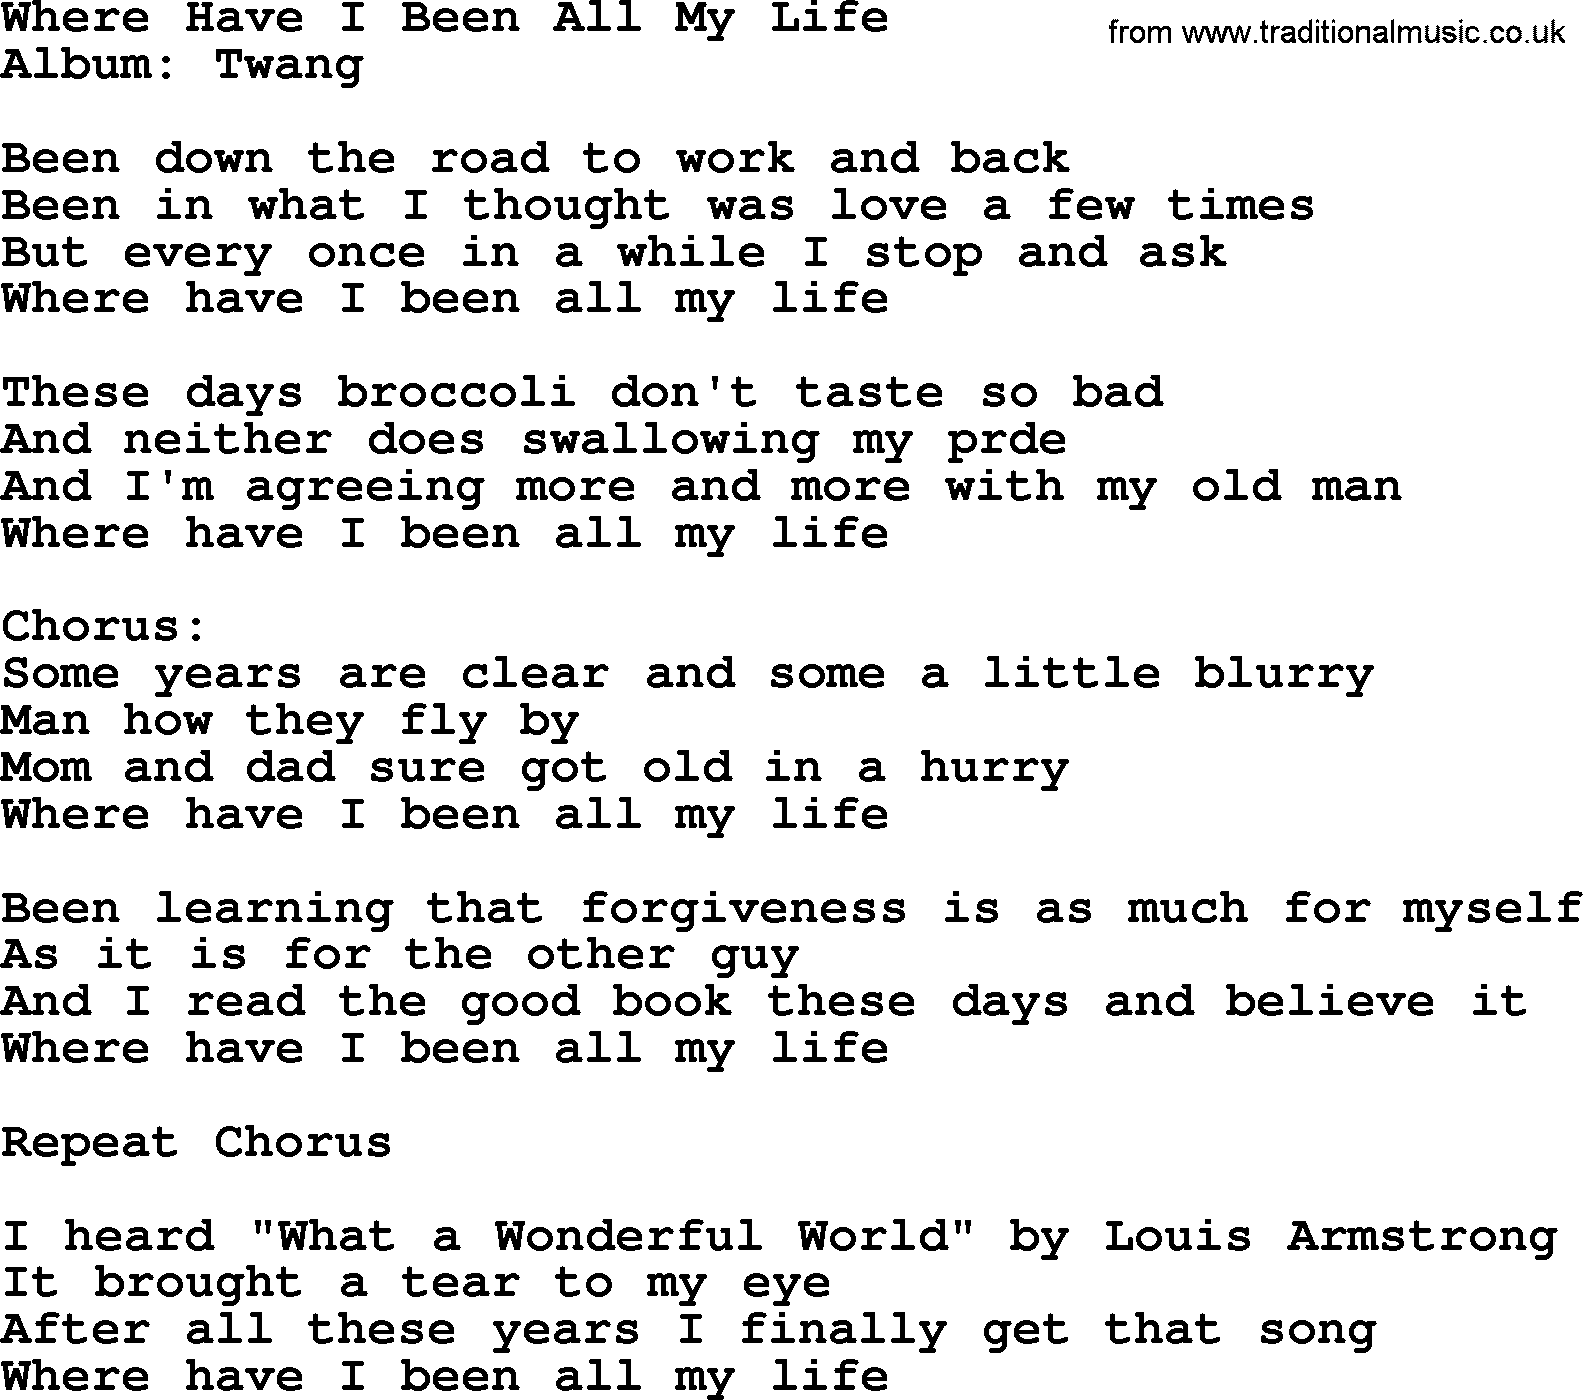 George Strait song: Where Have I Been All My Life, lyrics